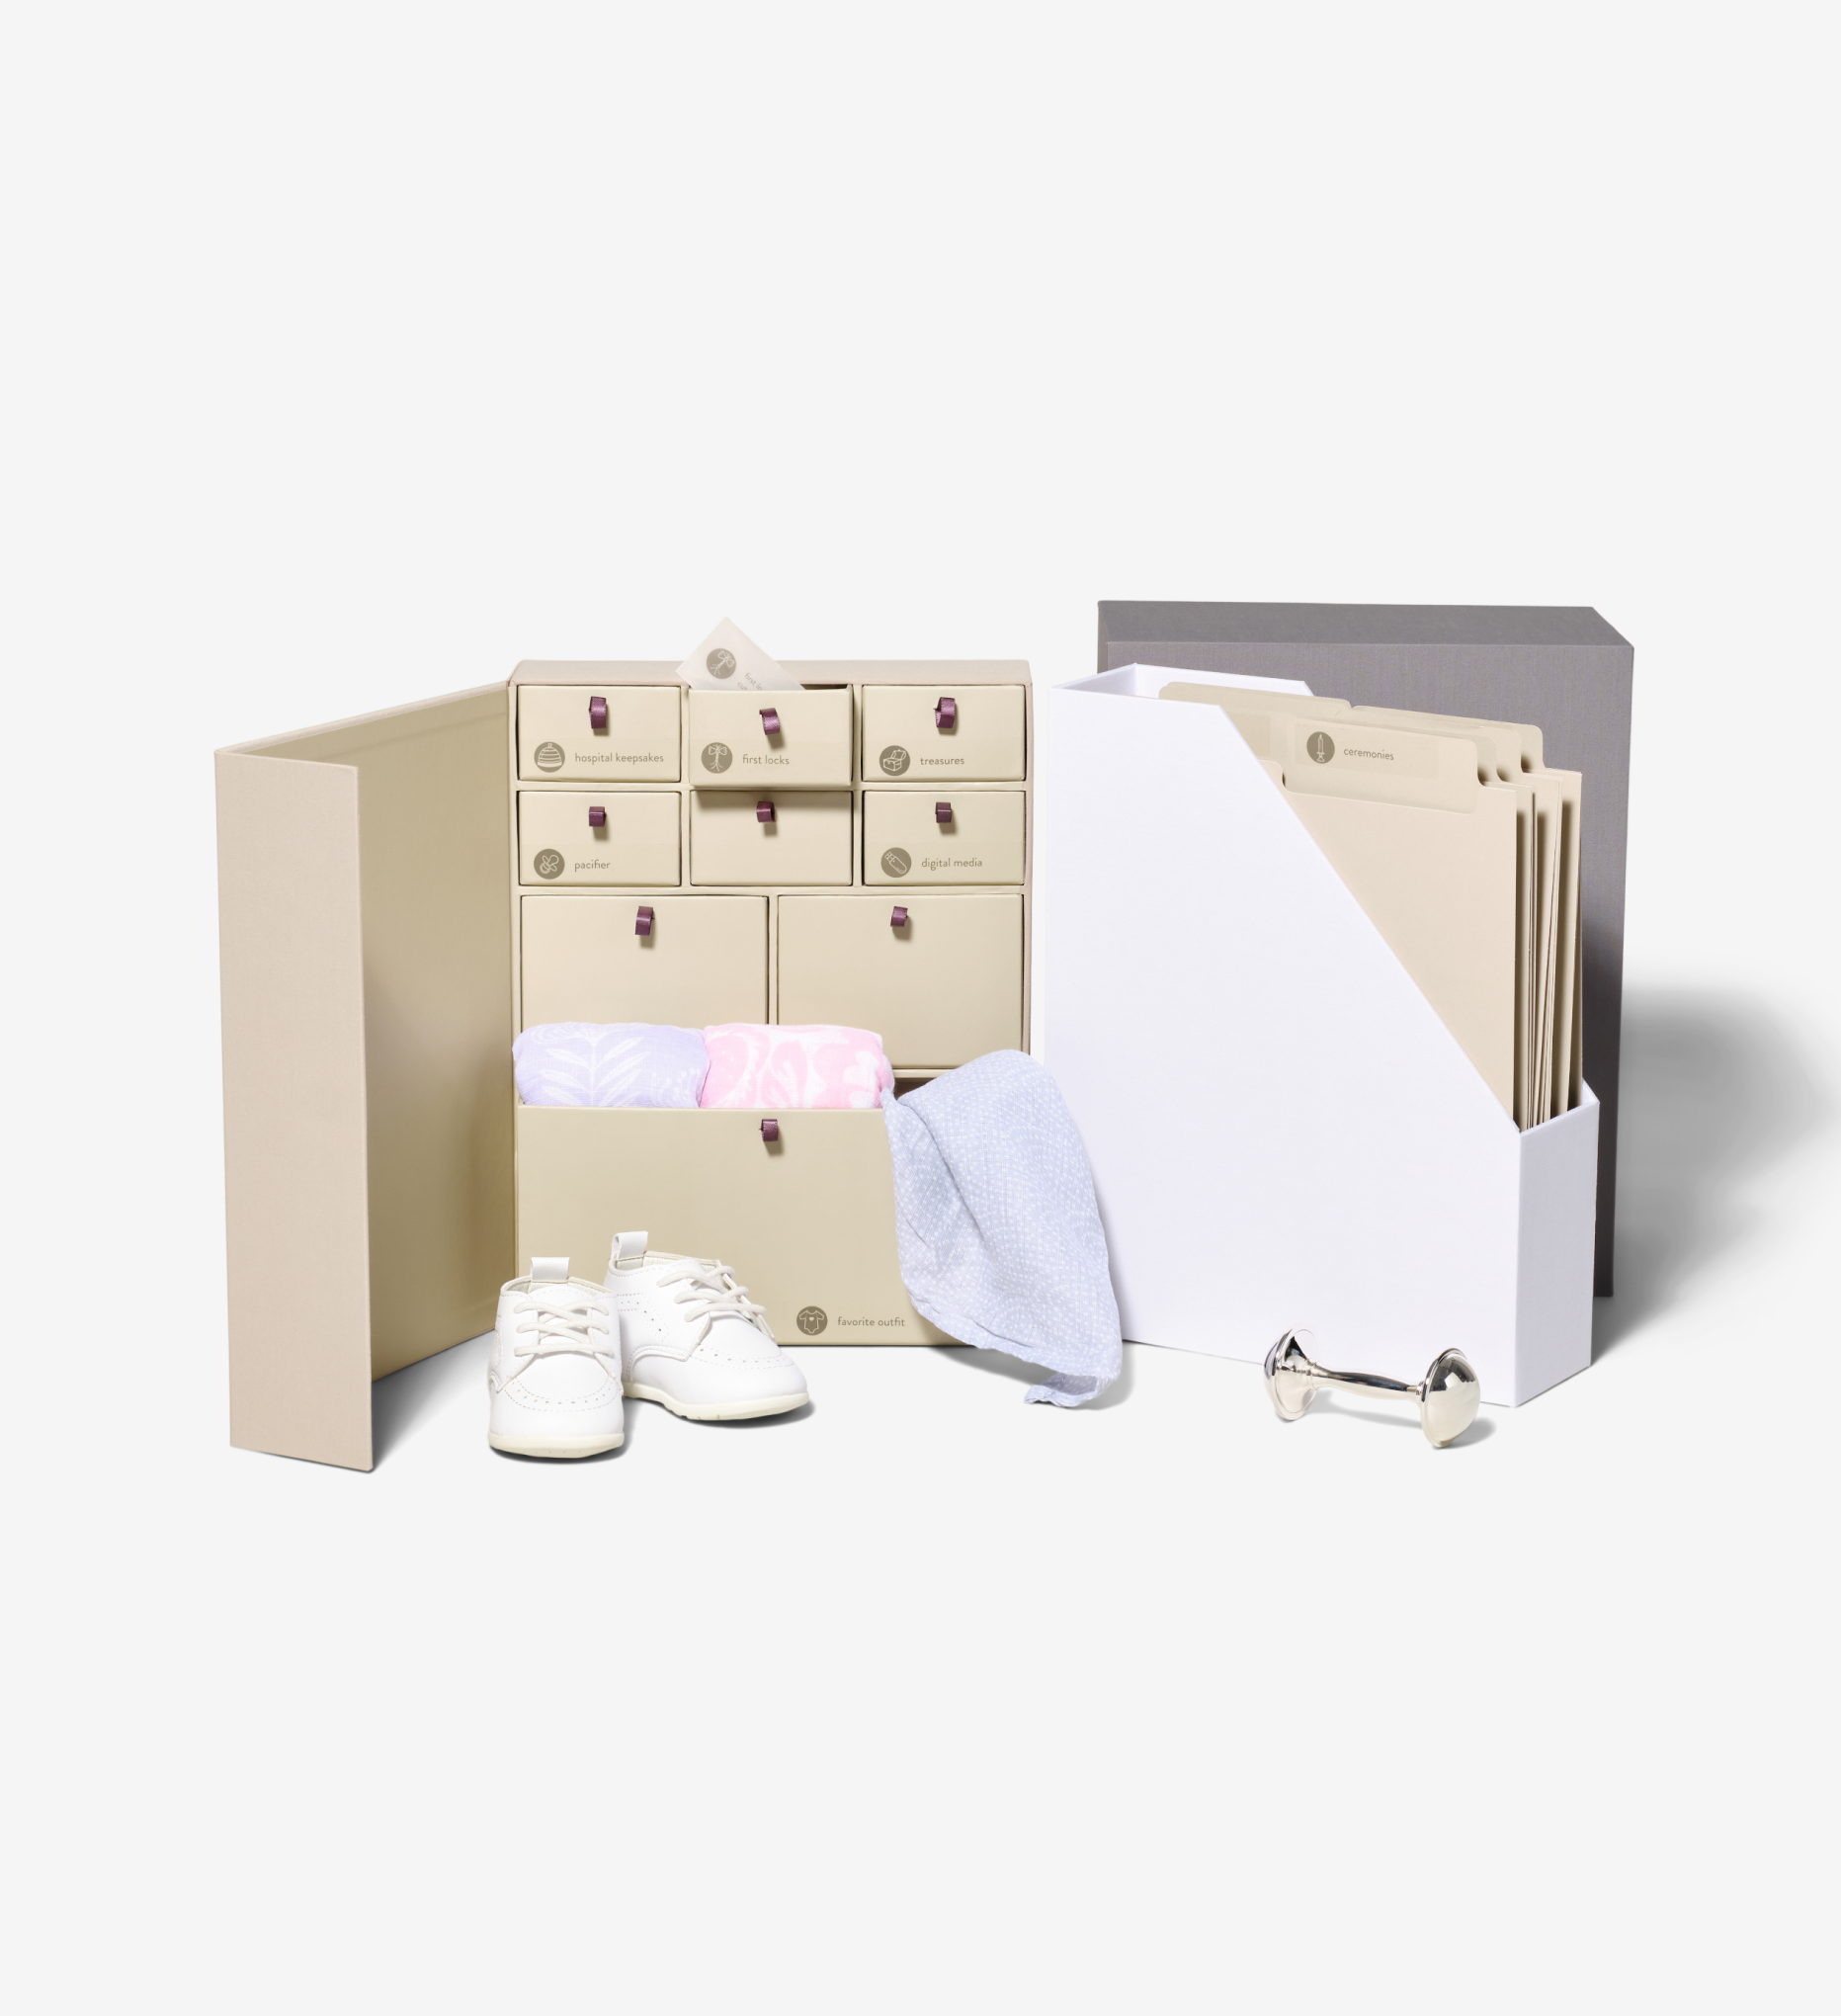 Savor deluxe baby keepsake box, interior boxes displayed: a beige box with drawers and a white compartment full of folders; baby mementos partially outside the drawers